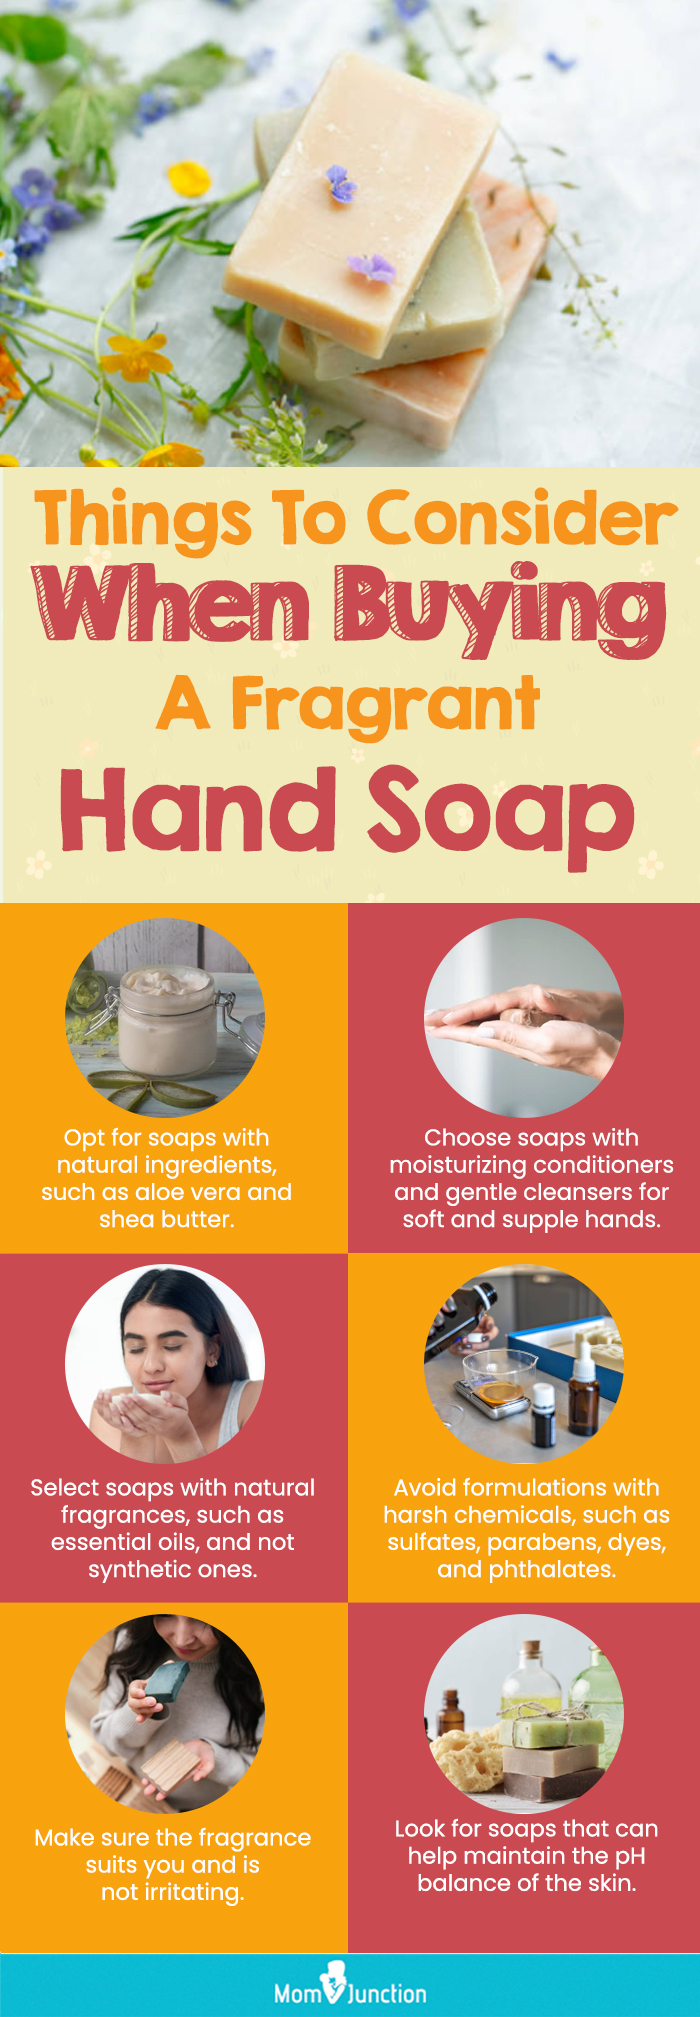 Things To Consider When Buying A Fragrant Hand Soap(infographic)